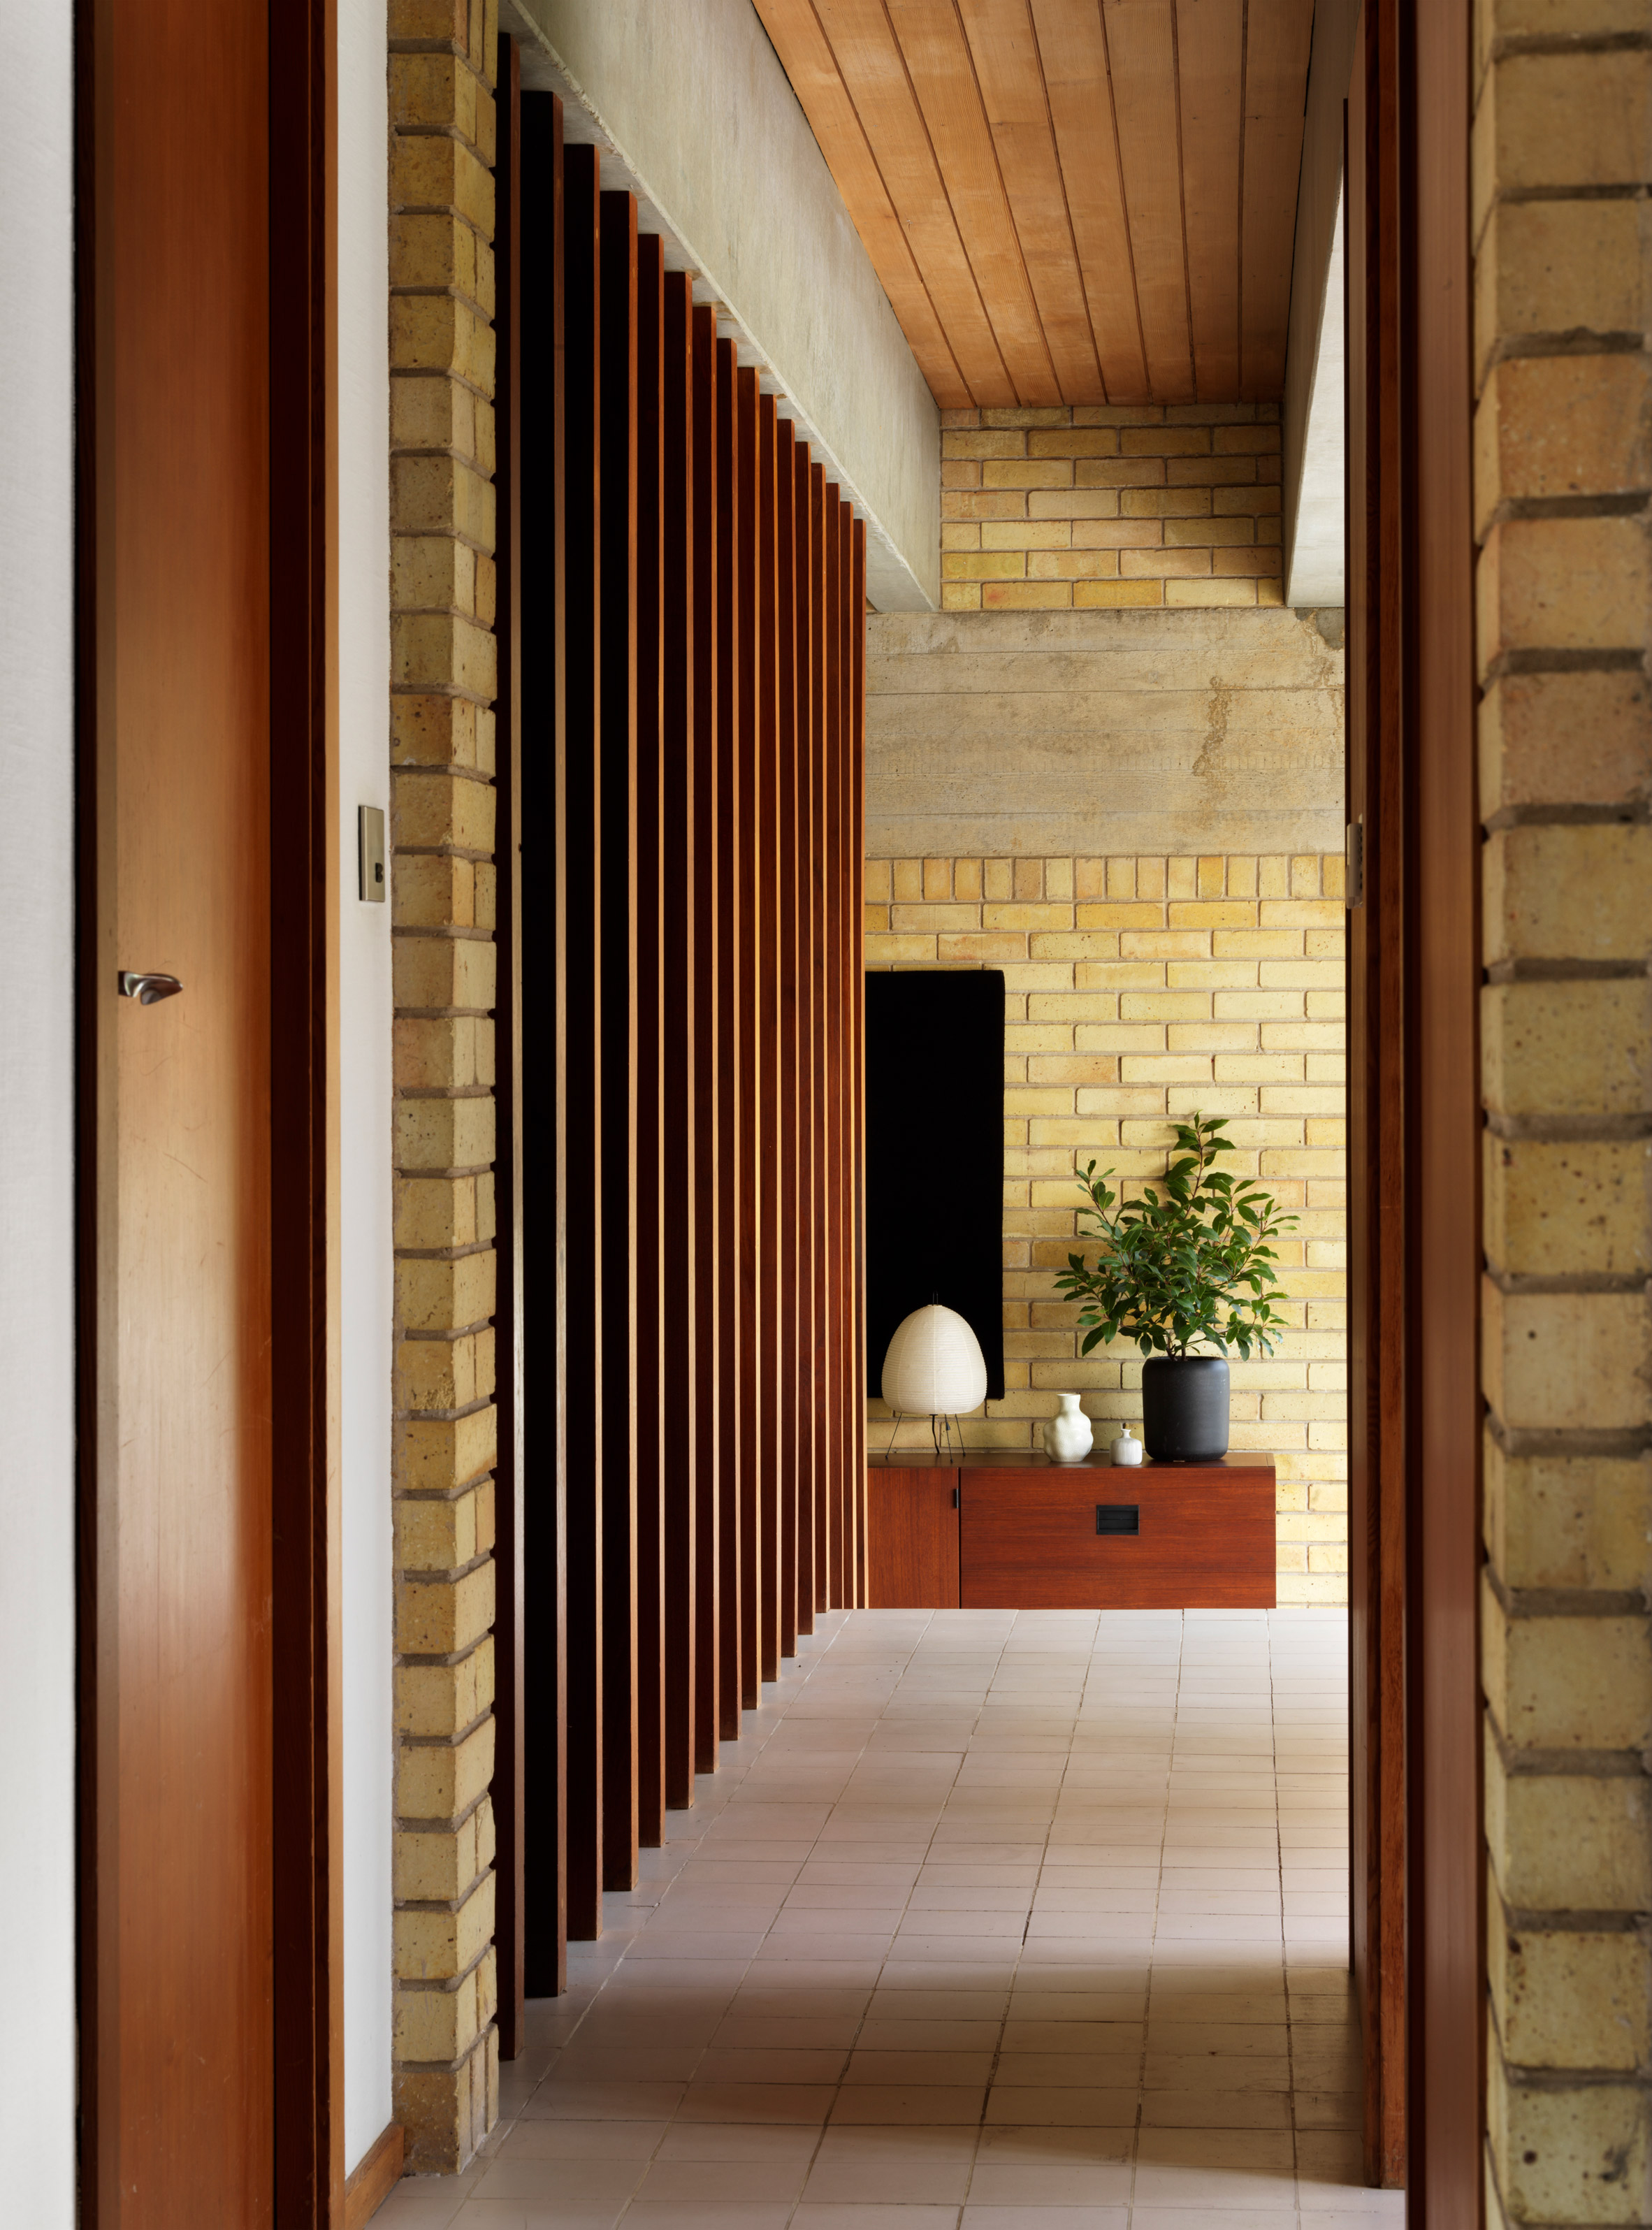 Interior of Ahm House by Jørn Utzon renovated by Coppin Dockray